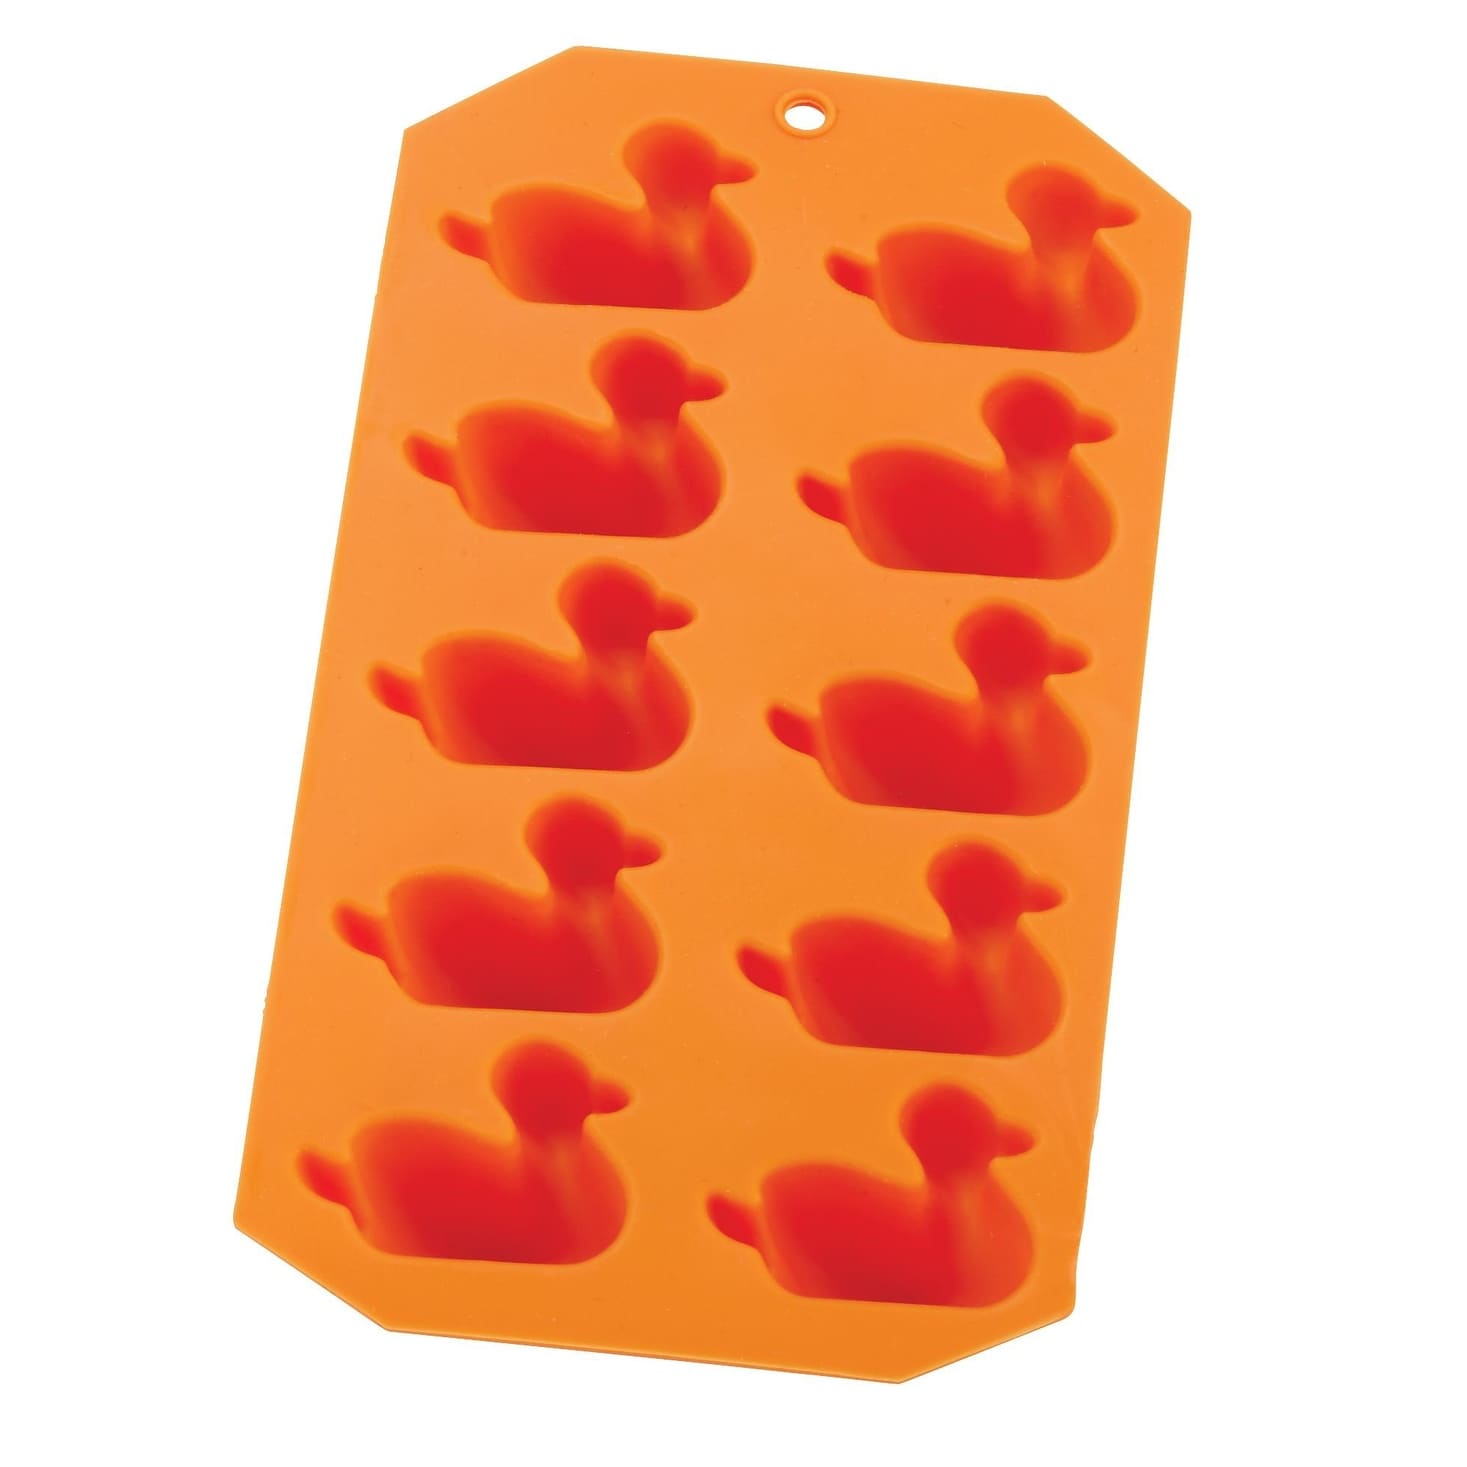 HIC Red Silicone Big Block Ice Cube Tray and Baking Mold - Makes 8 Oversized  Cubes - Bed Bath & Beyond - 31629734